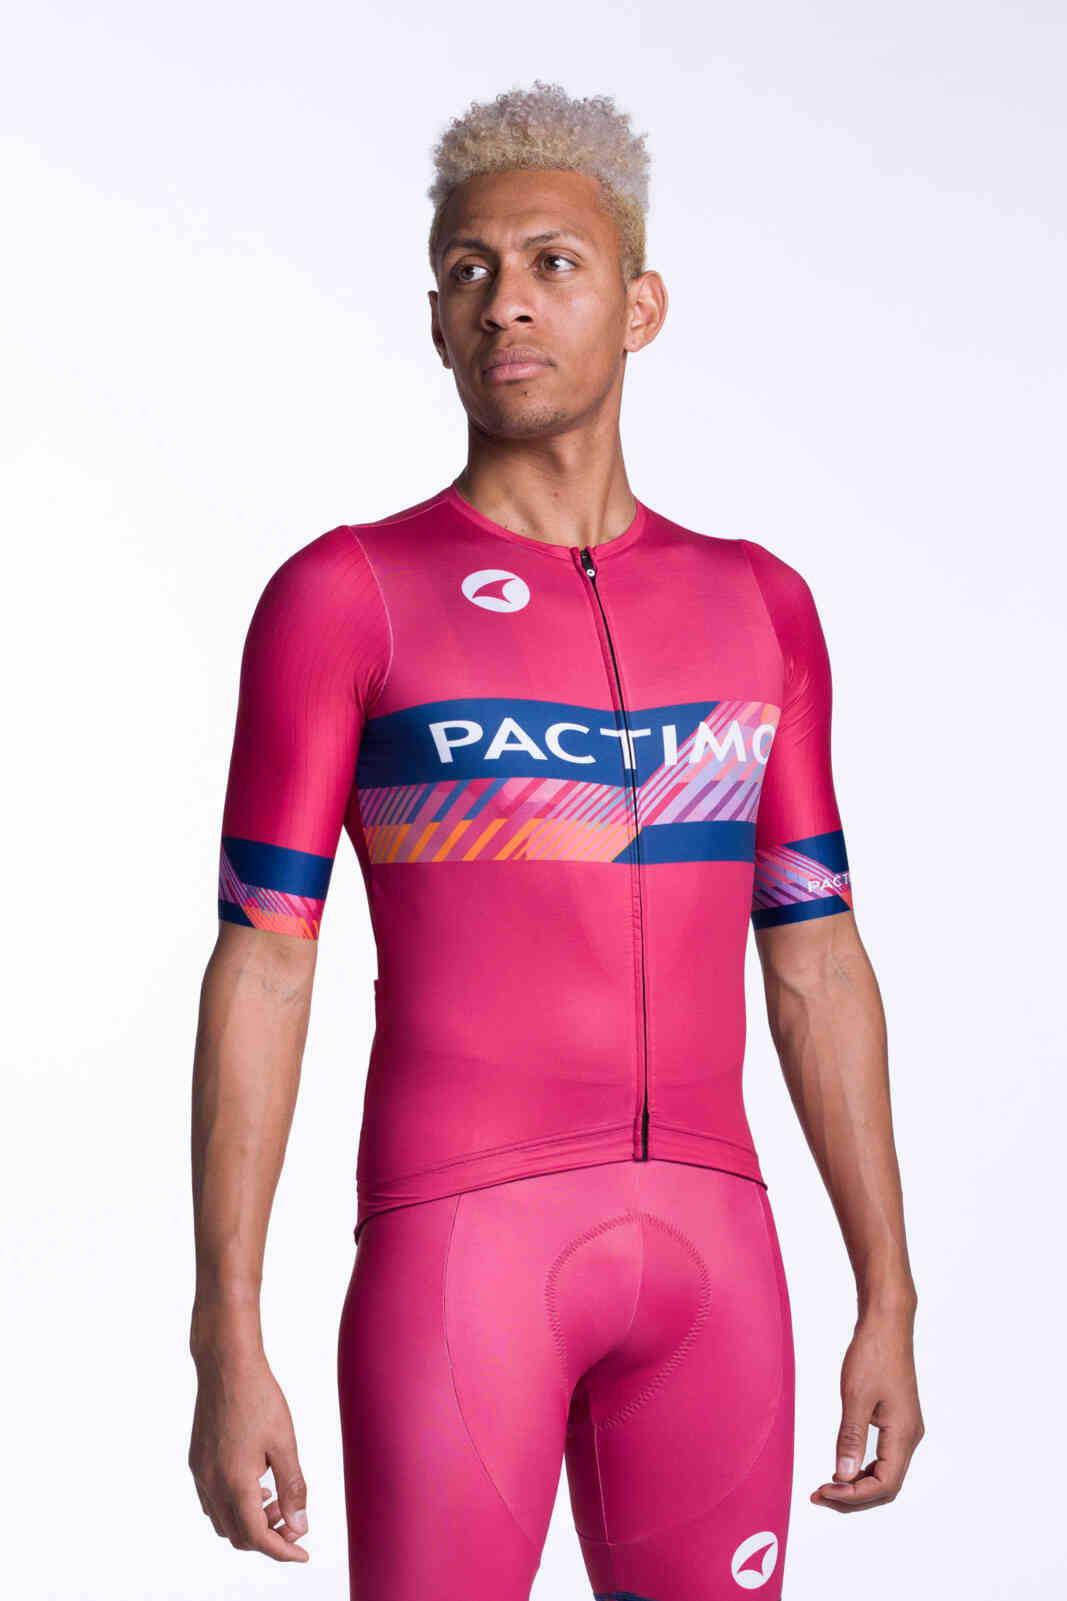 Pactimo: Custom Cycling Tri Clothing - Delivery – Pactimo Custom